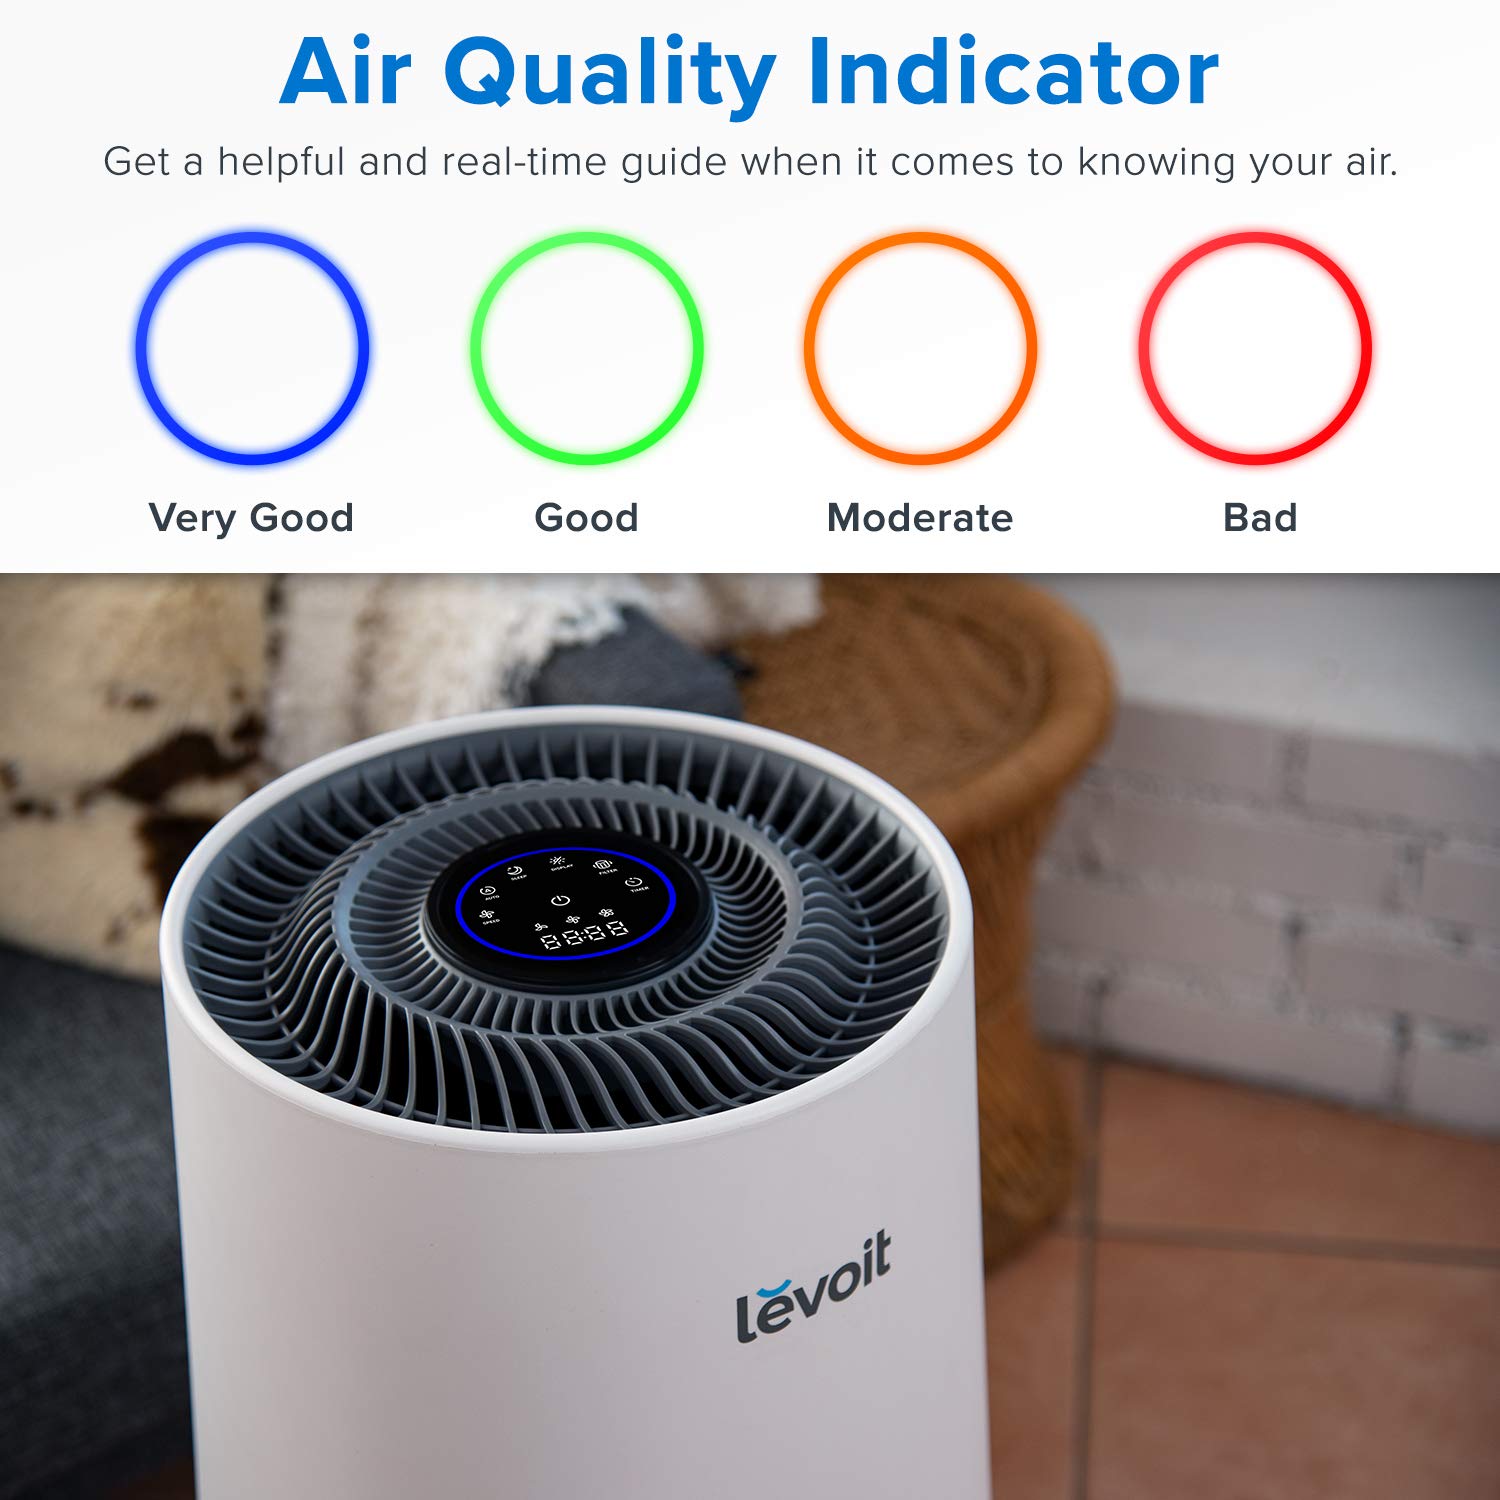 Levoit Air Purifiers Light Indicators Meaning